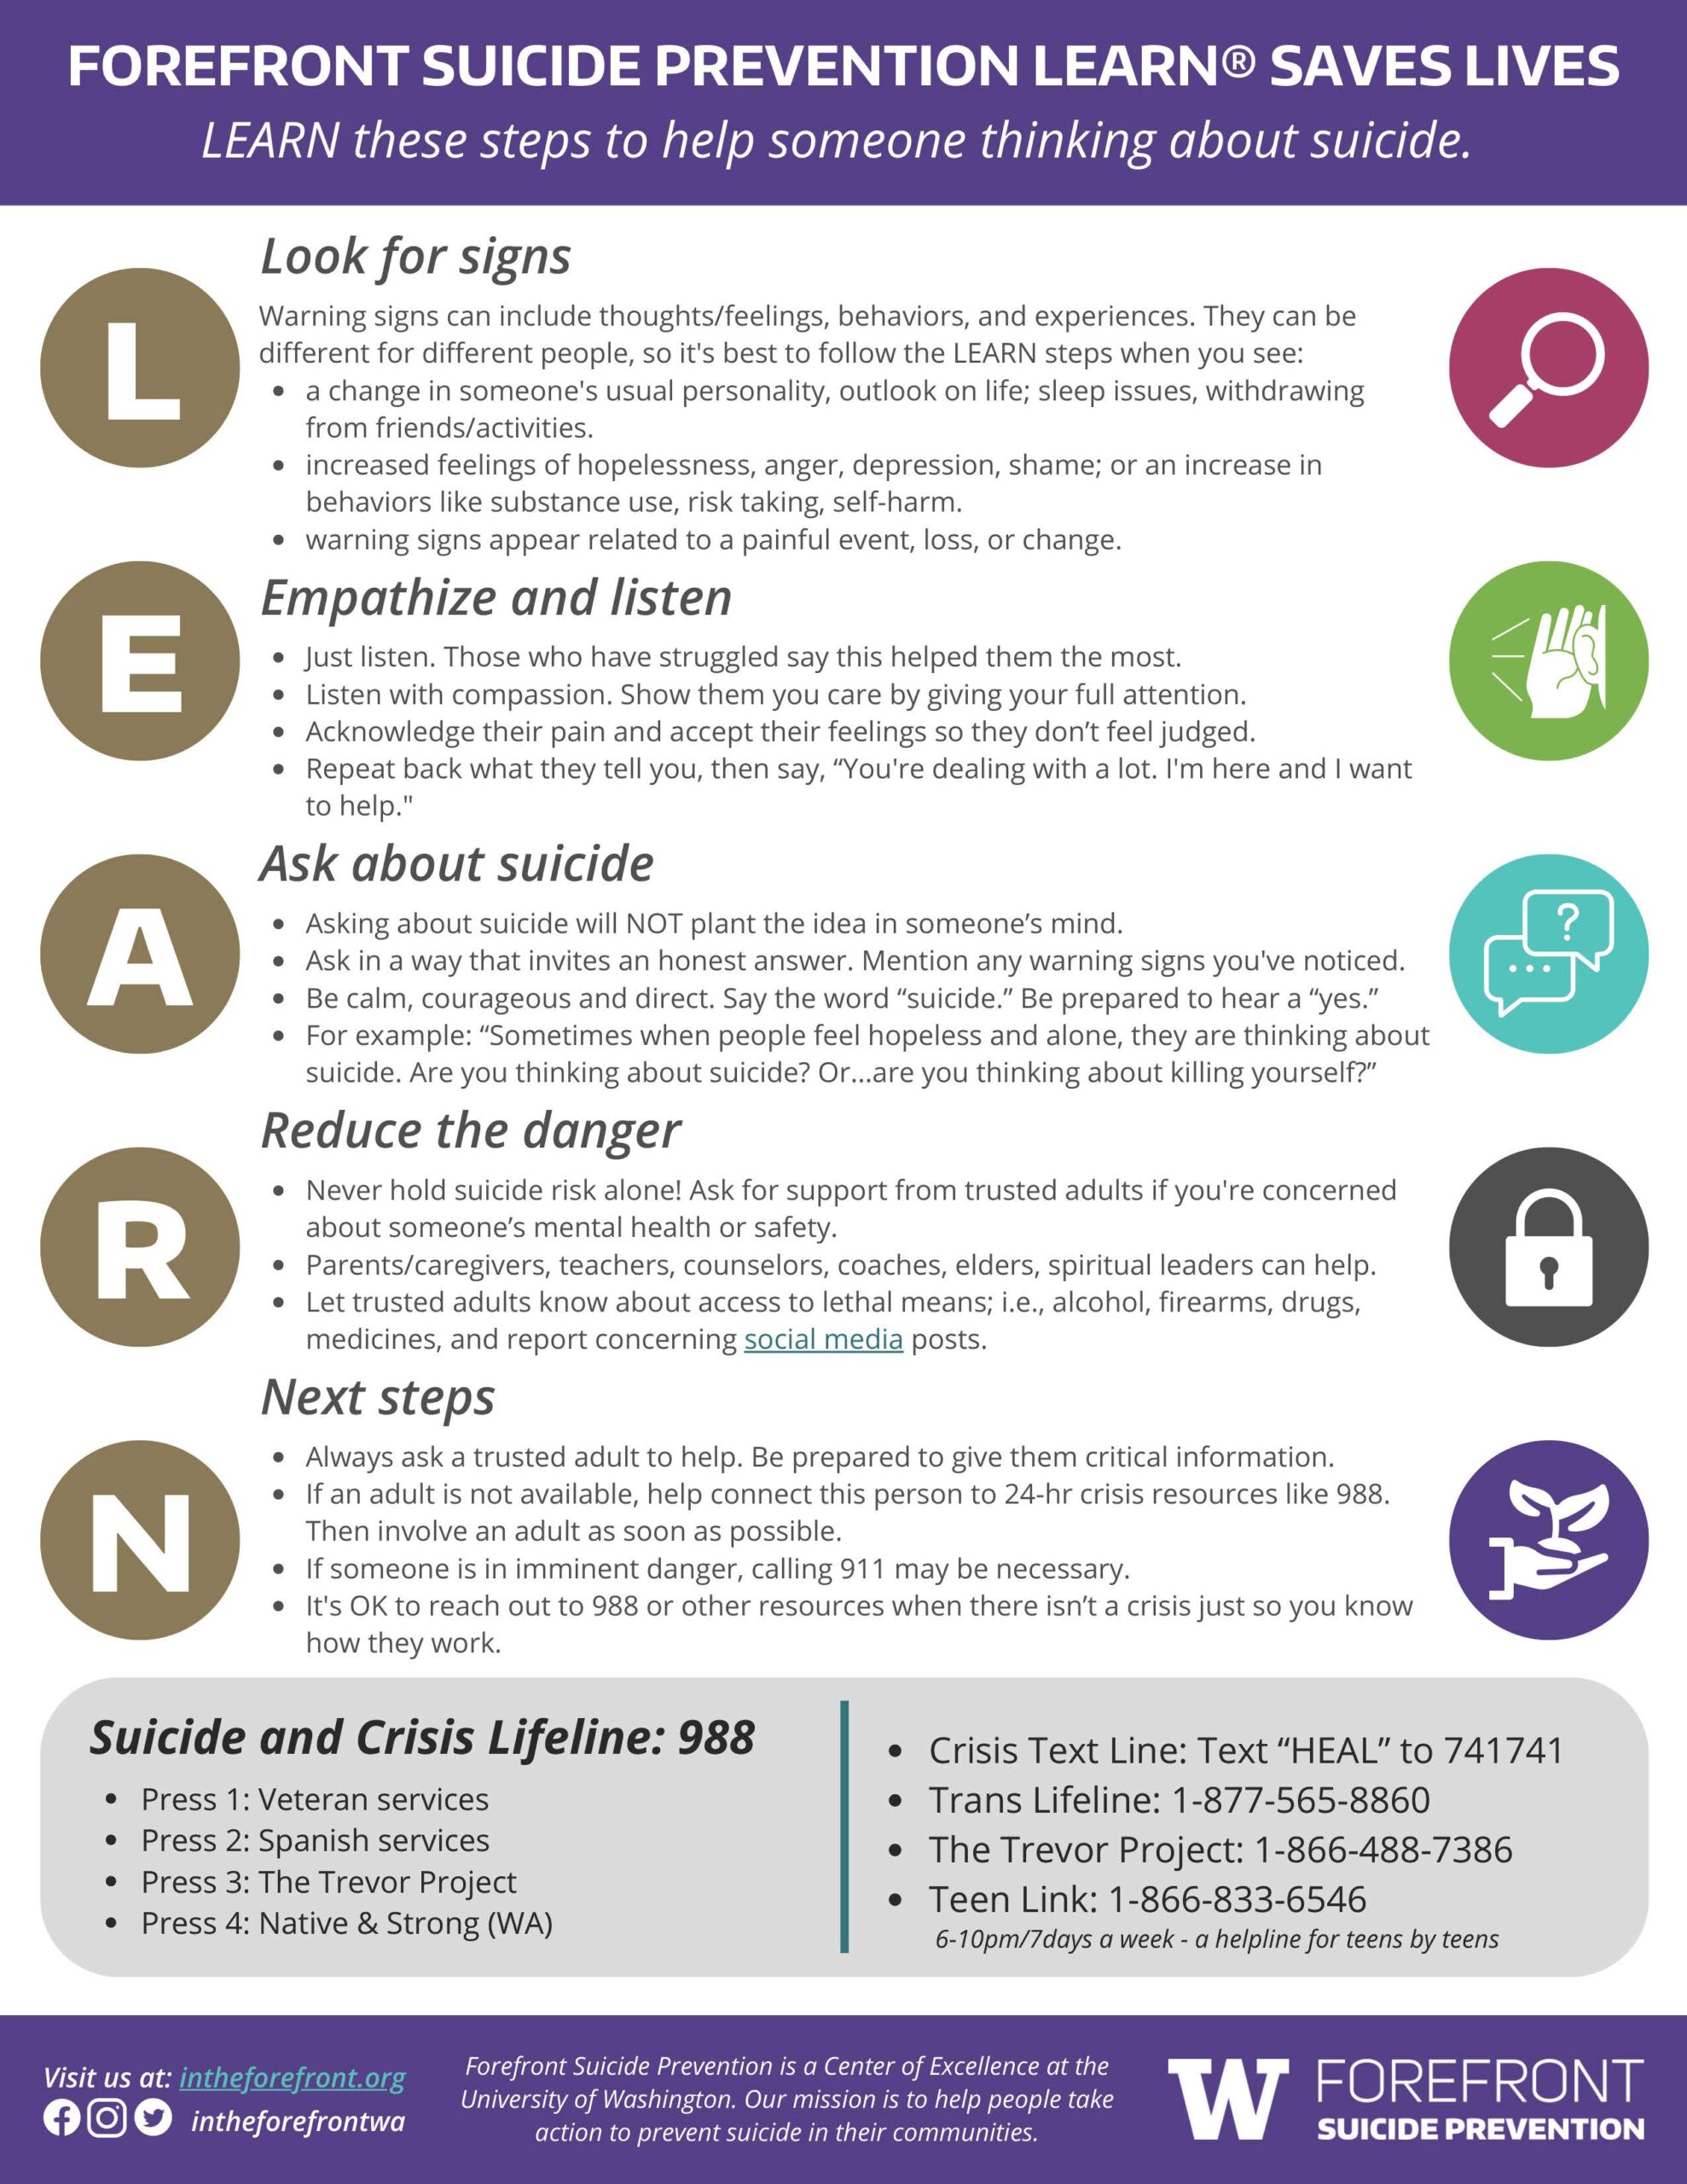 An infographic titled "Forefront suicide prevention LEARN saves lives. LEARN these steps to help someone thinking about suicide."